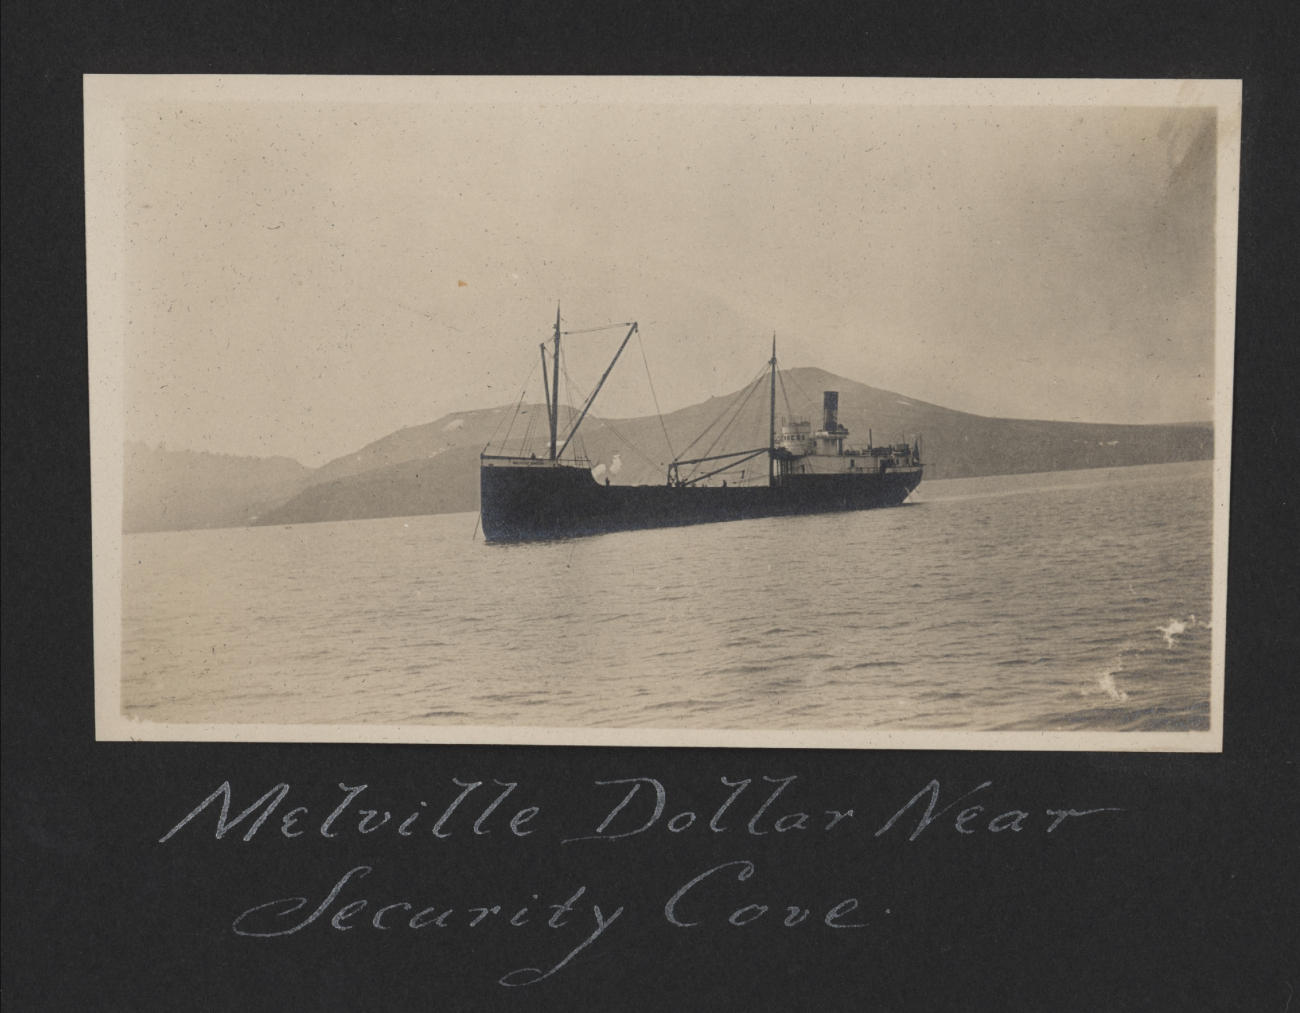 The freighter MELVILLE DOLLAR at Security Cove